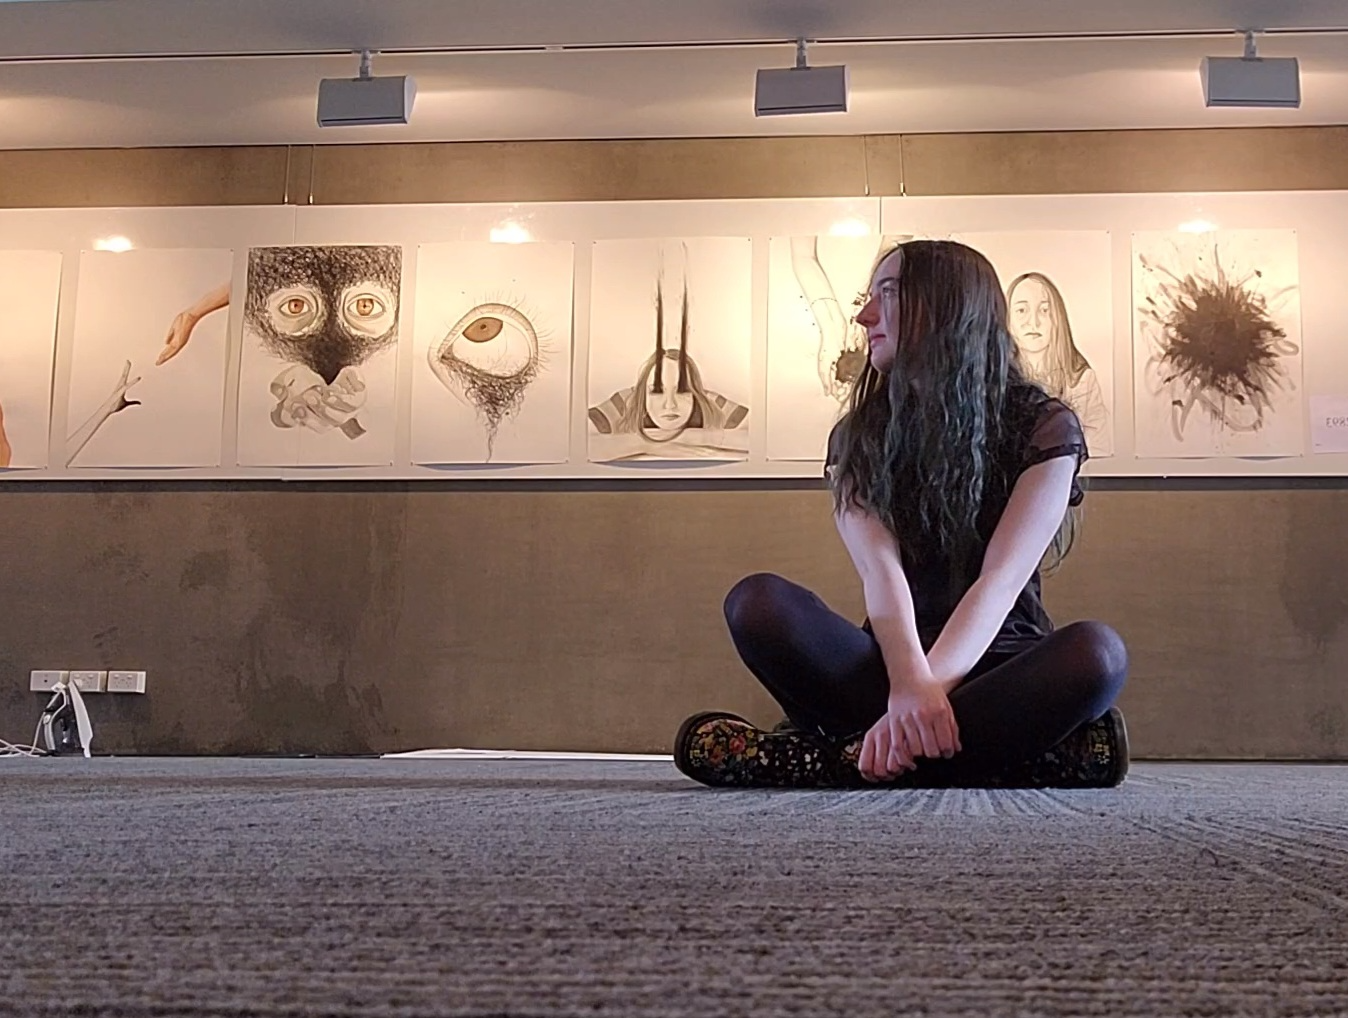 [Image: Young girl wearing all black sitting cross-legged with an exhibit of her art behind her.]